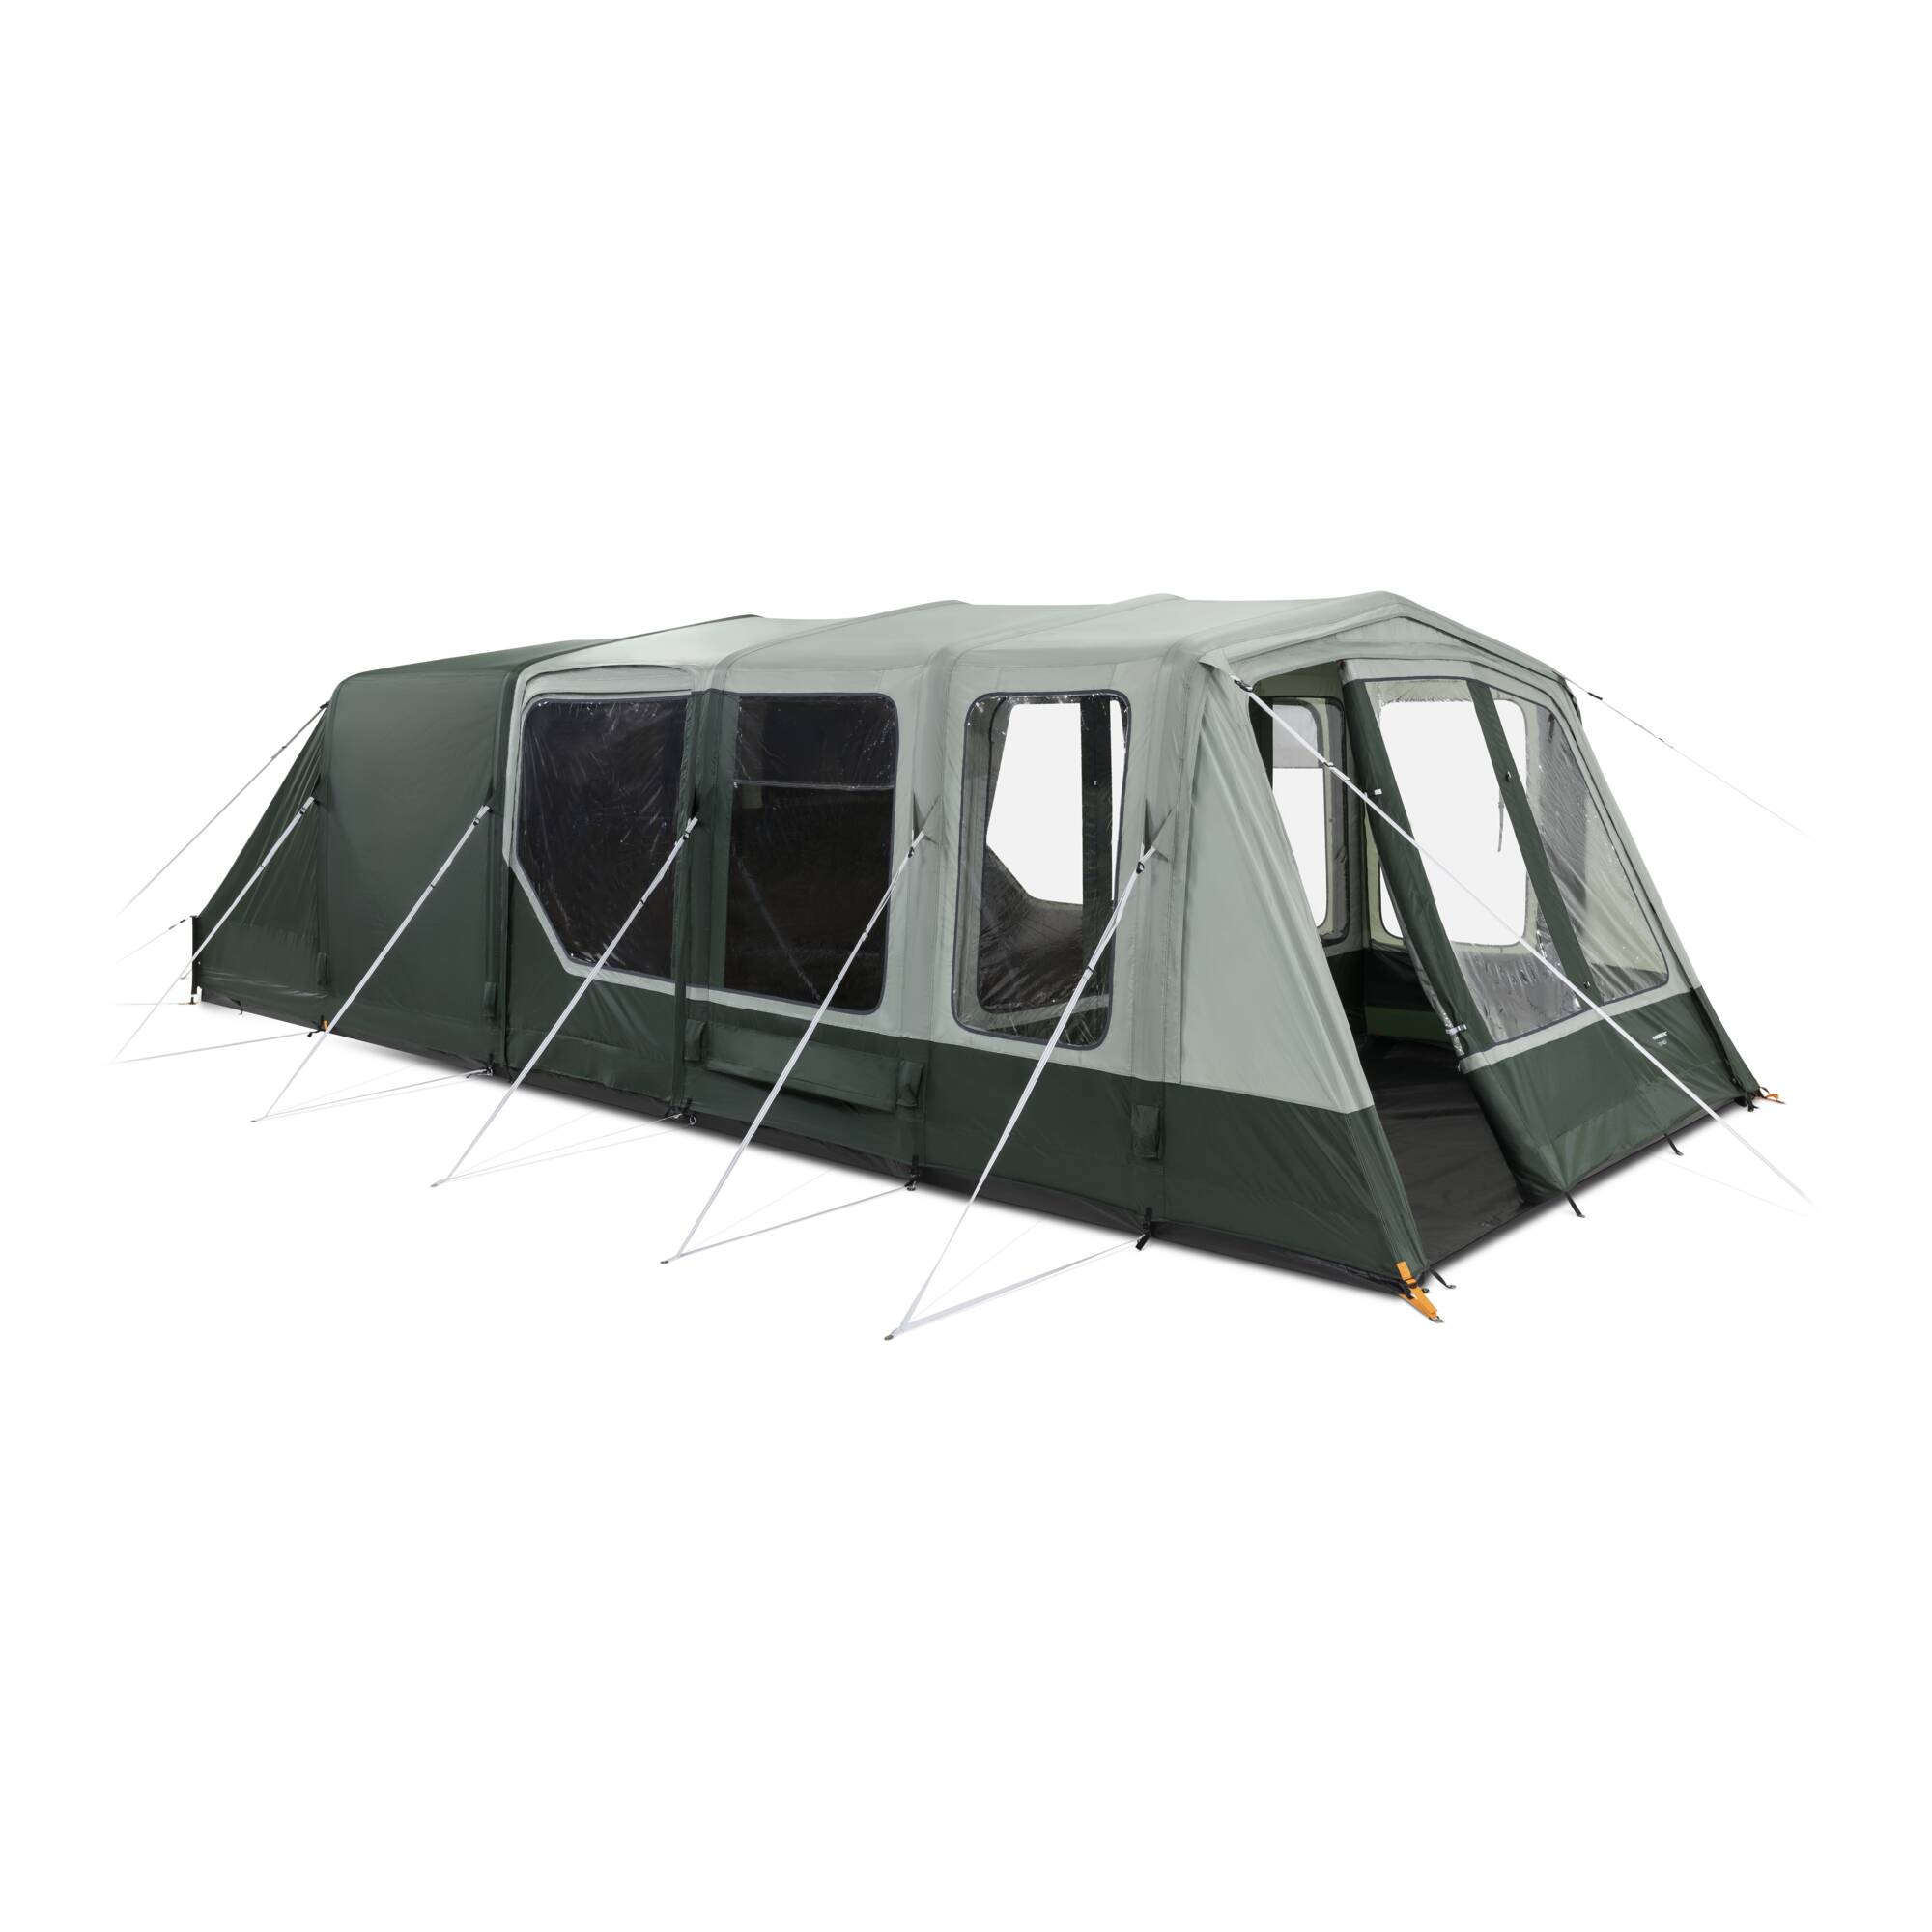 Dometic Ascension Ftx 401 Tent Spare Parts